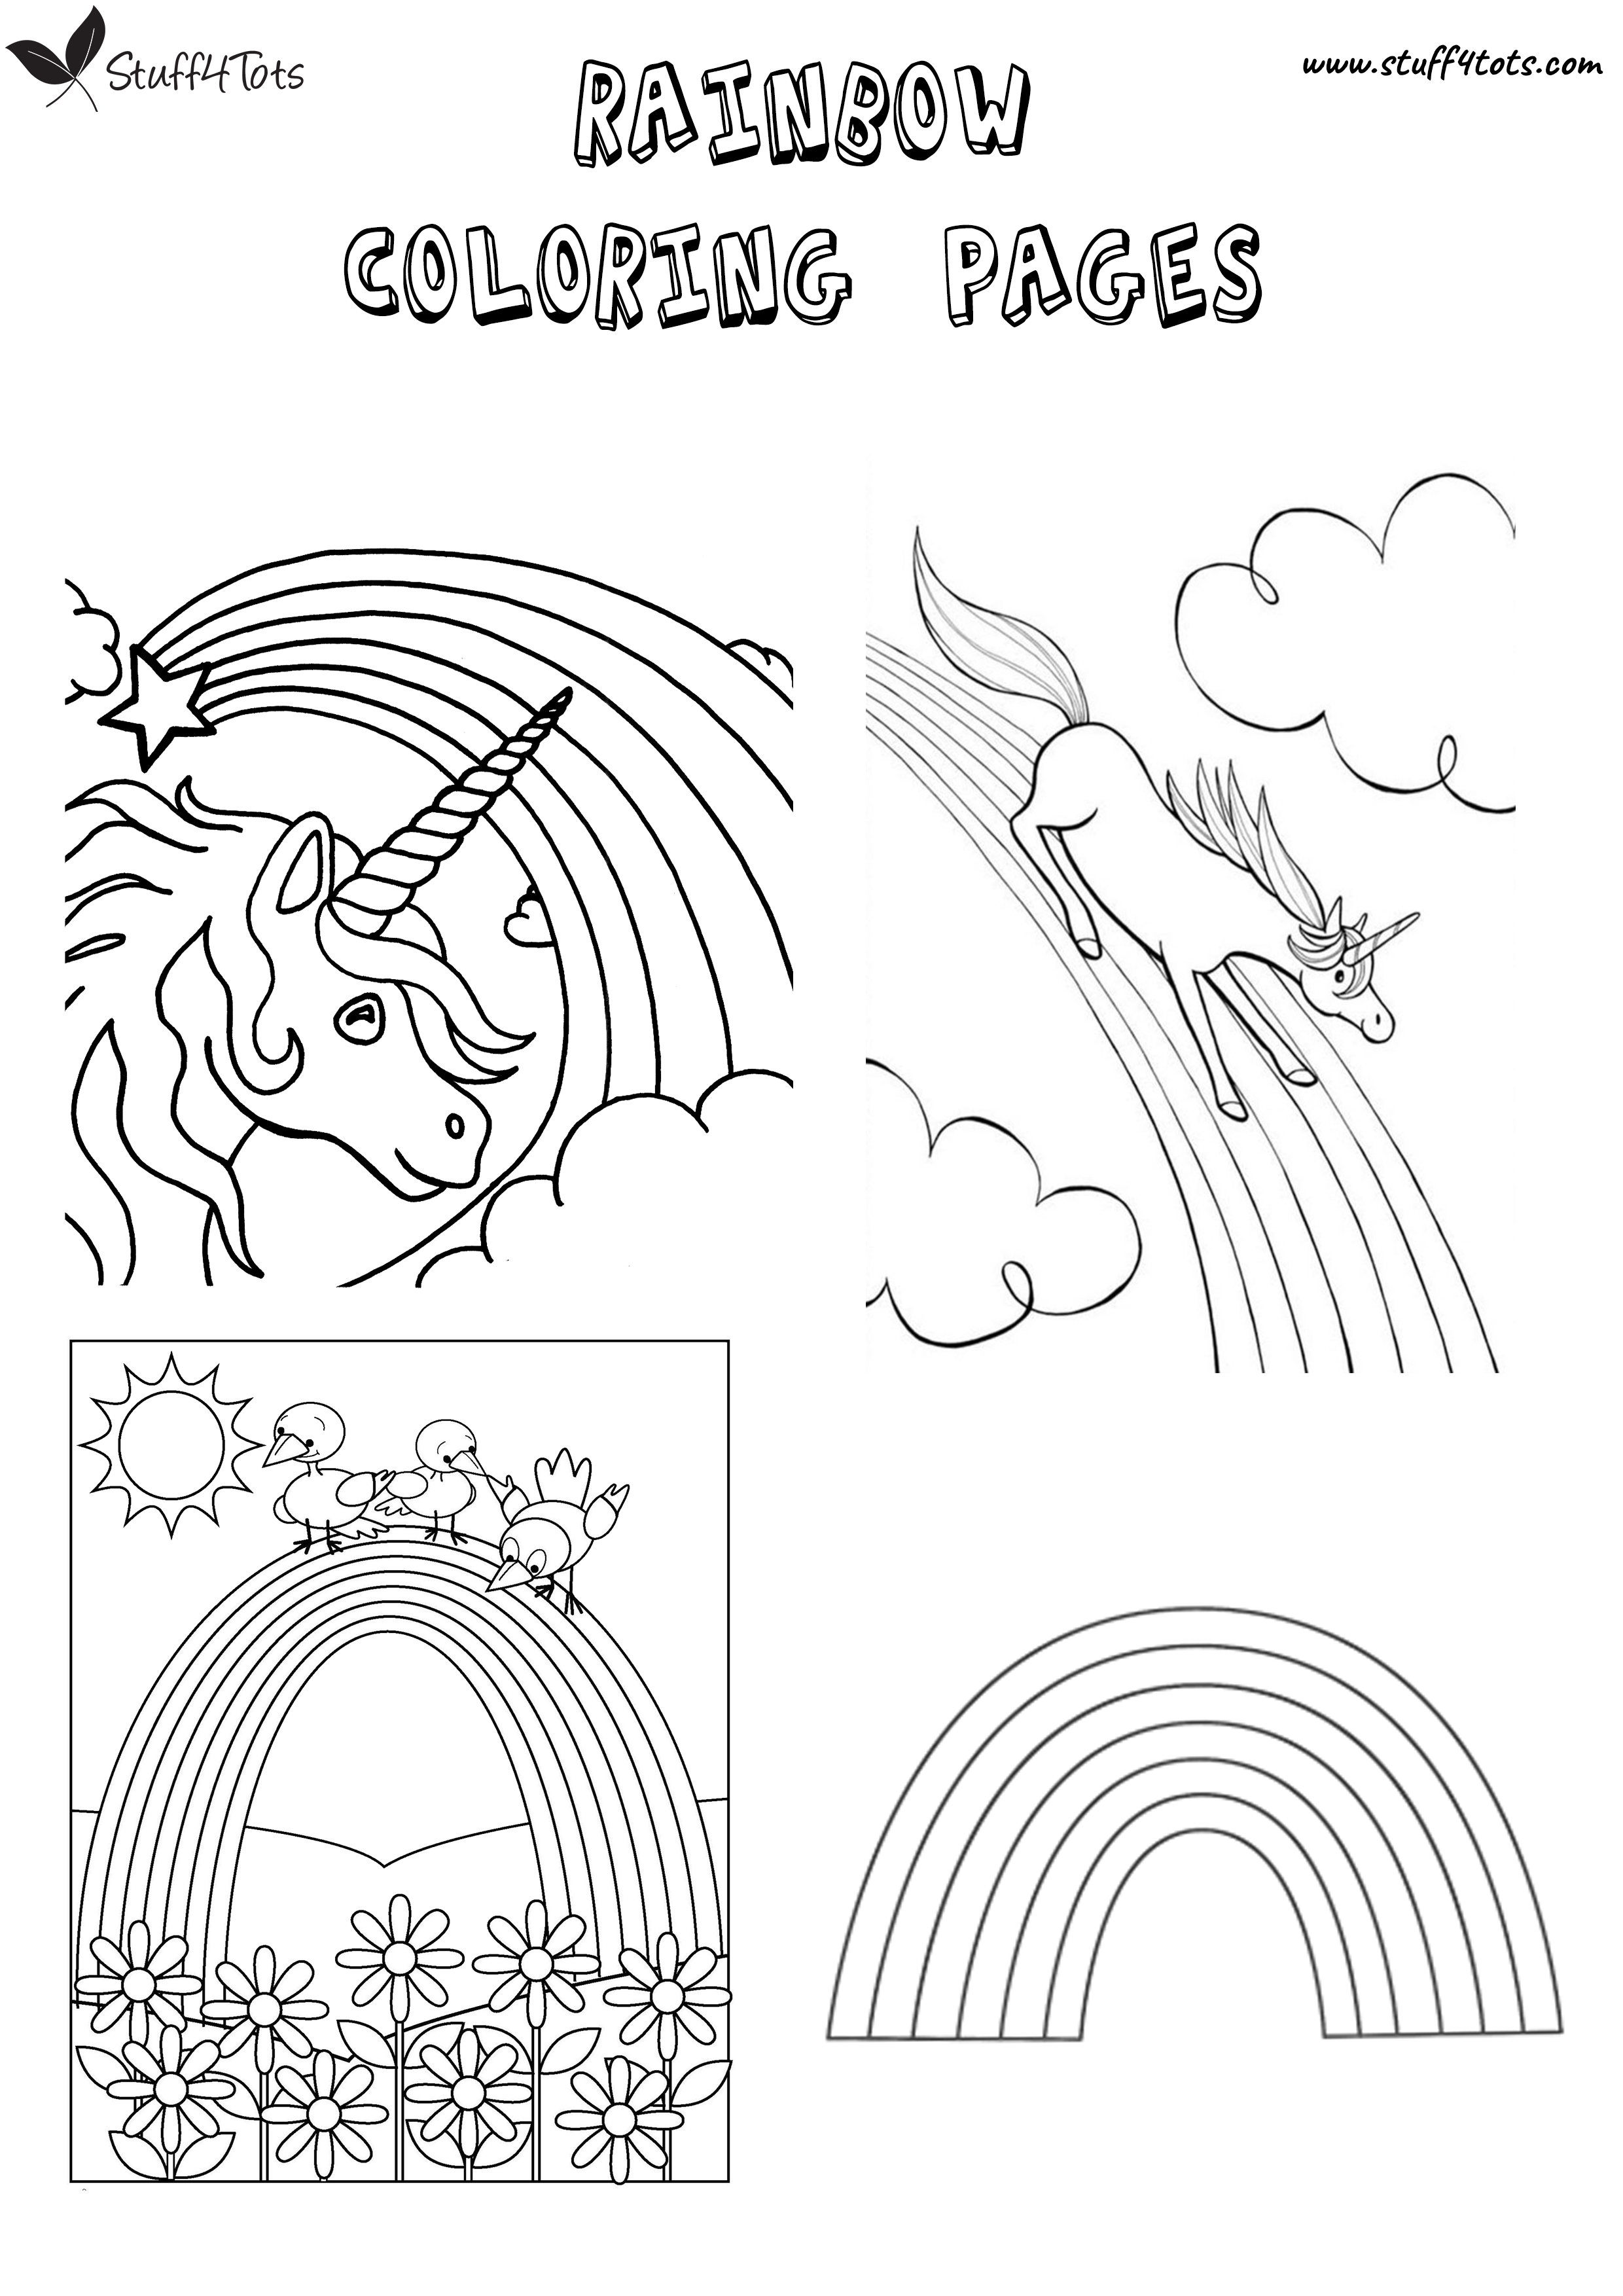 Rainbow themed coloring page